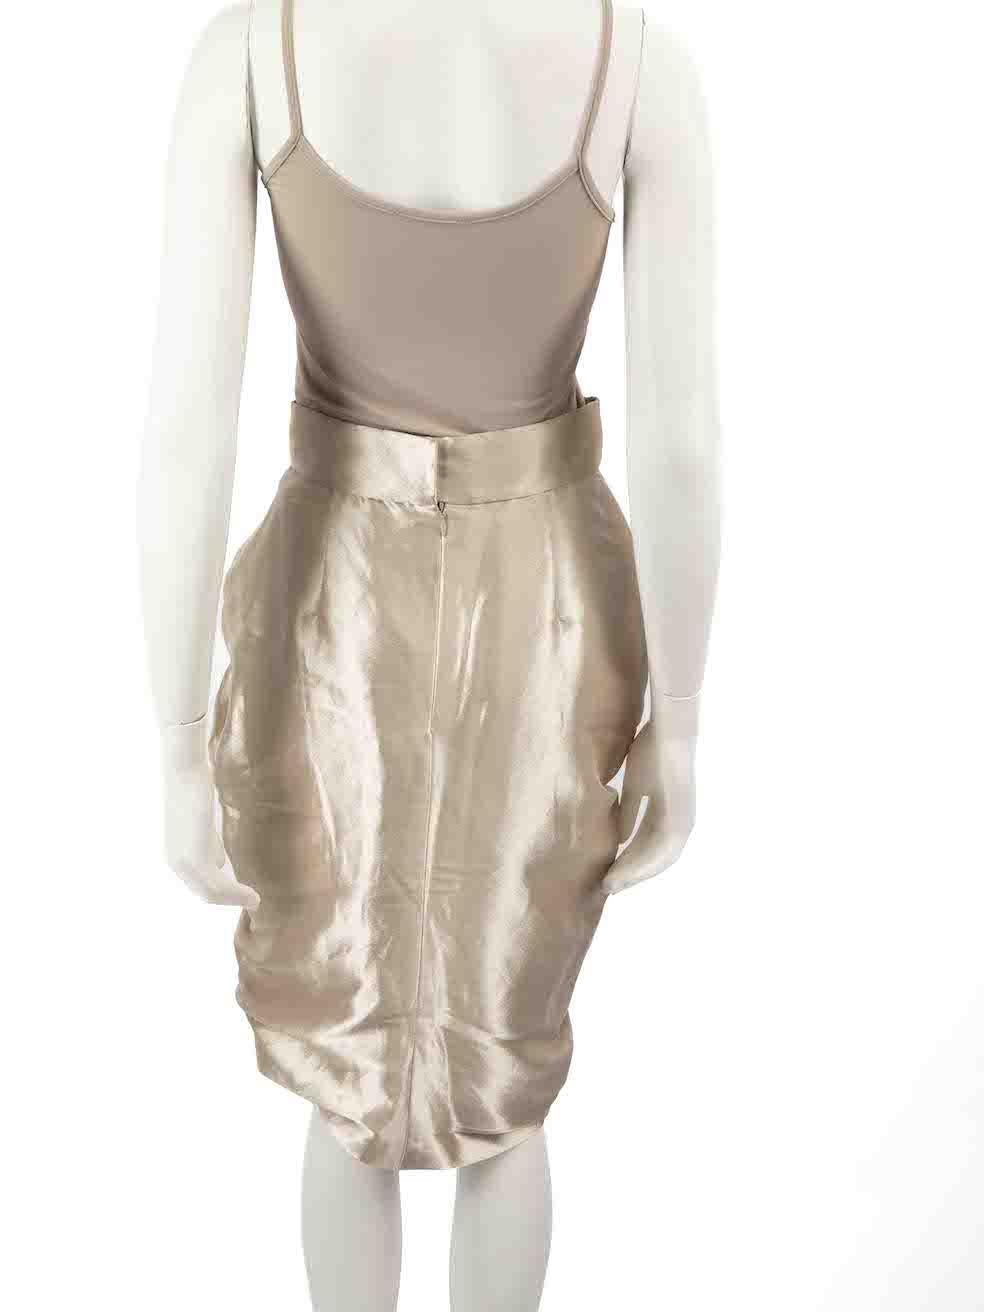 Chanel Beige Metallic Ruched Skirt Size M In Excellent Condition For Sale In London, GB